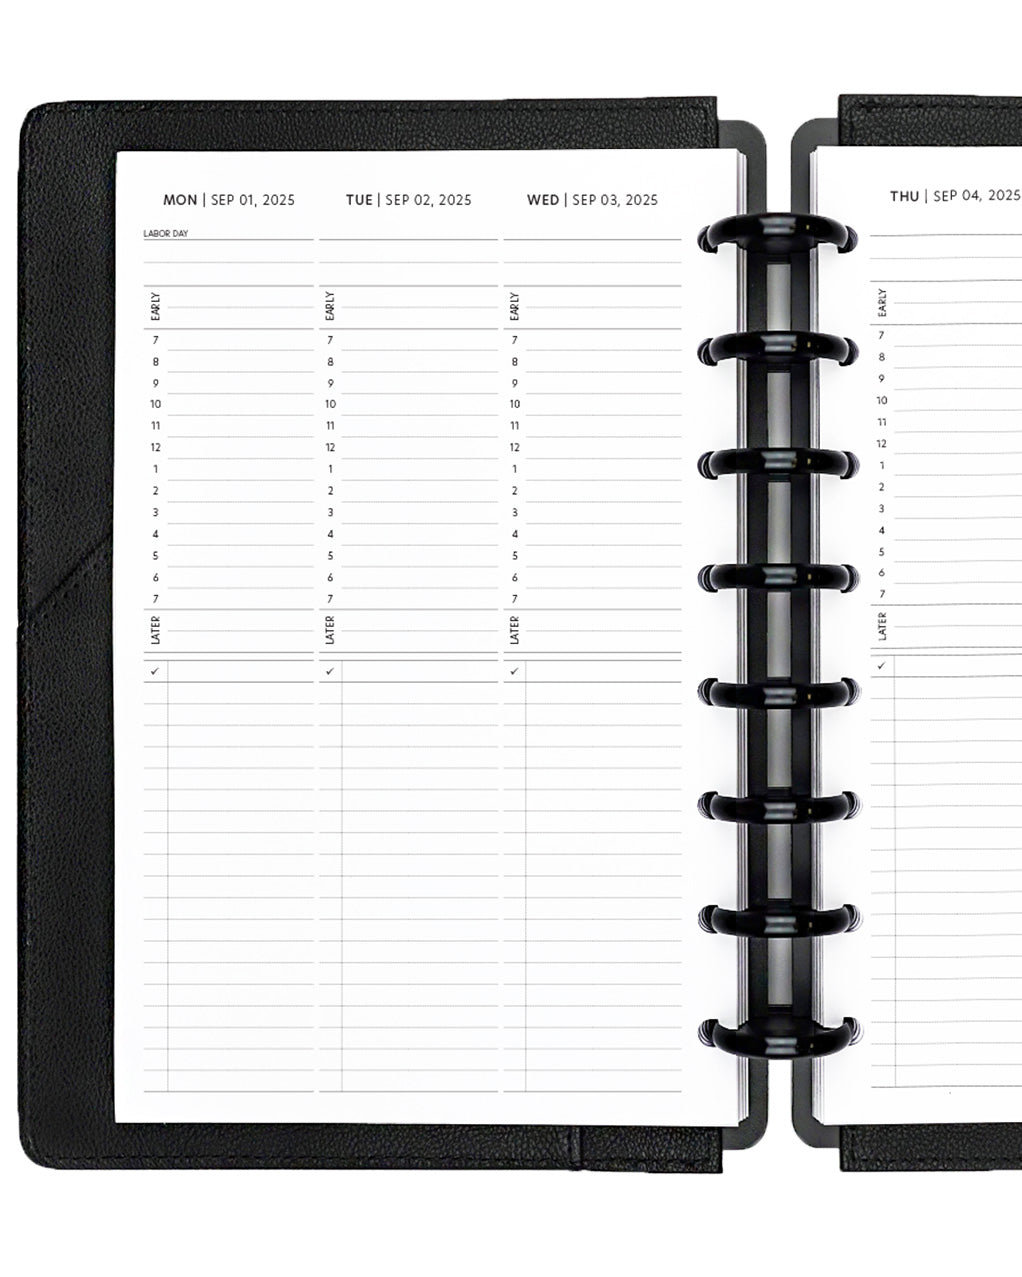 Weekly calendar planner insert refill pages for discbound planners, disc notebooks, and A5 size planner binder systems by Jane's Agenda.